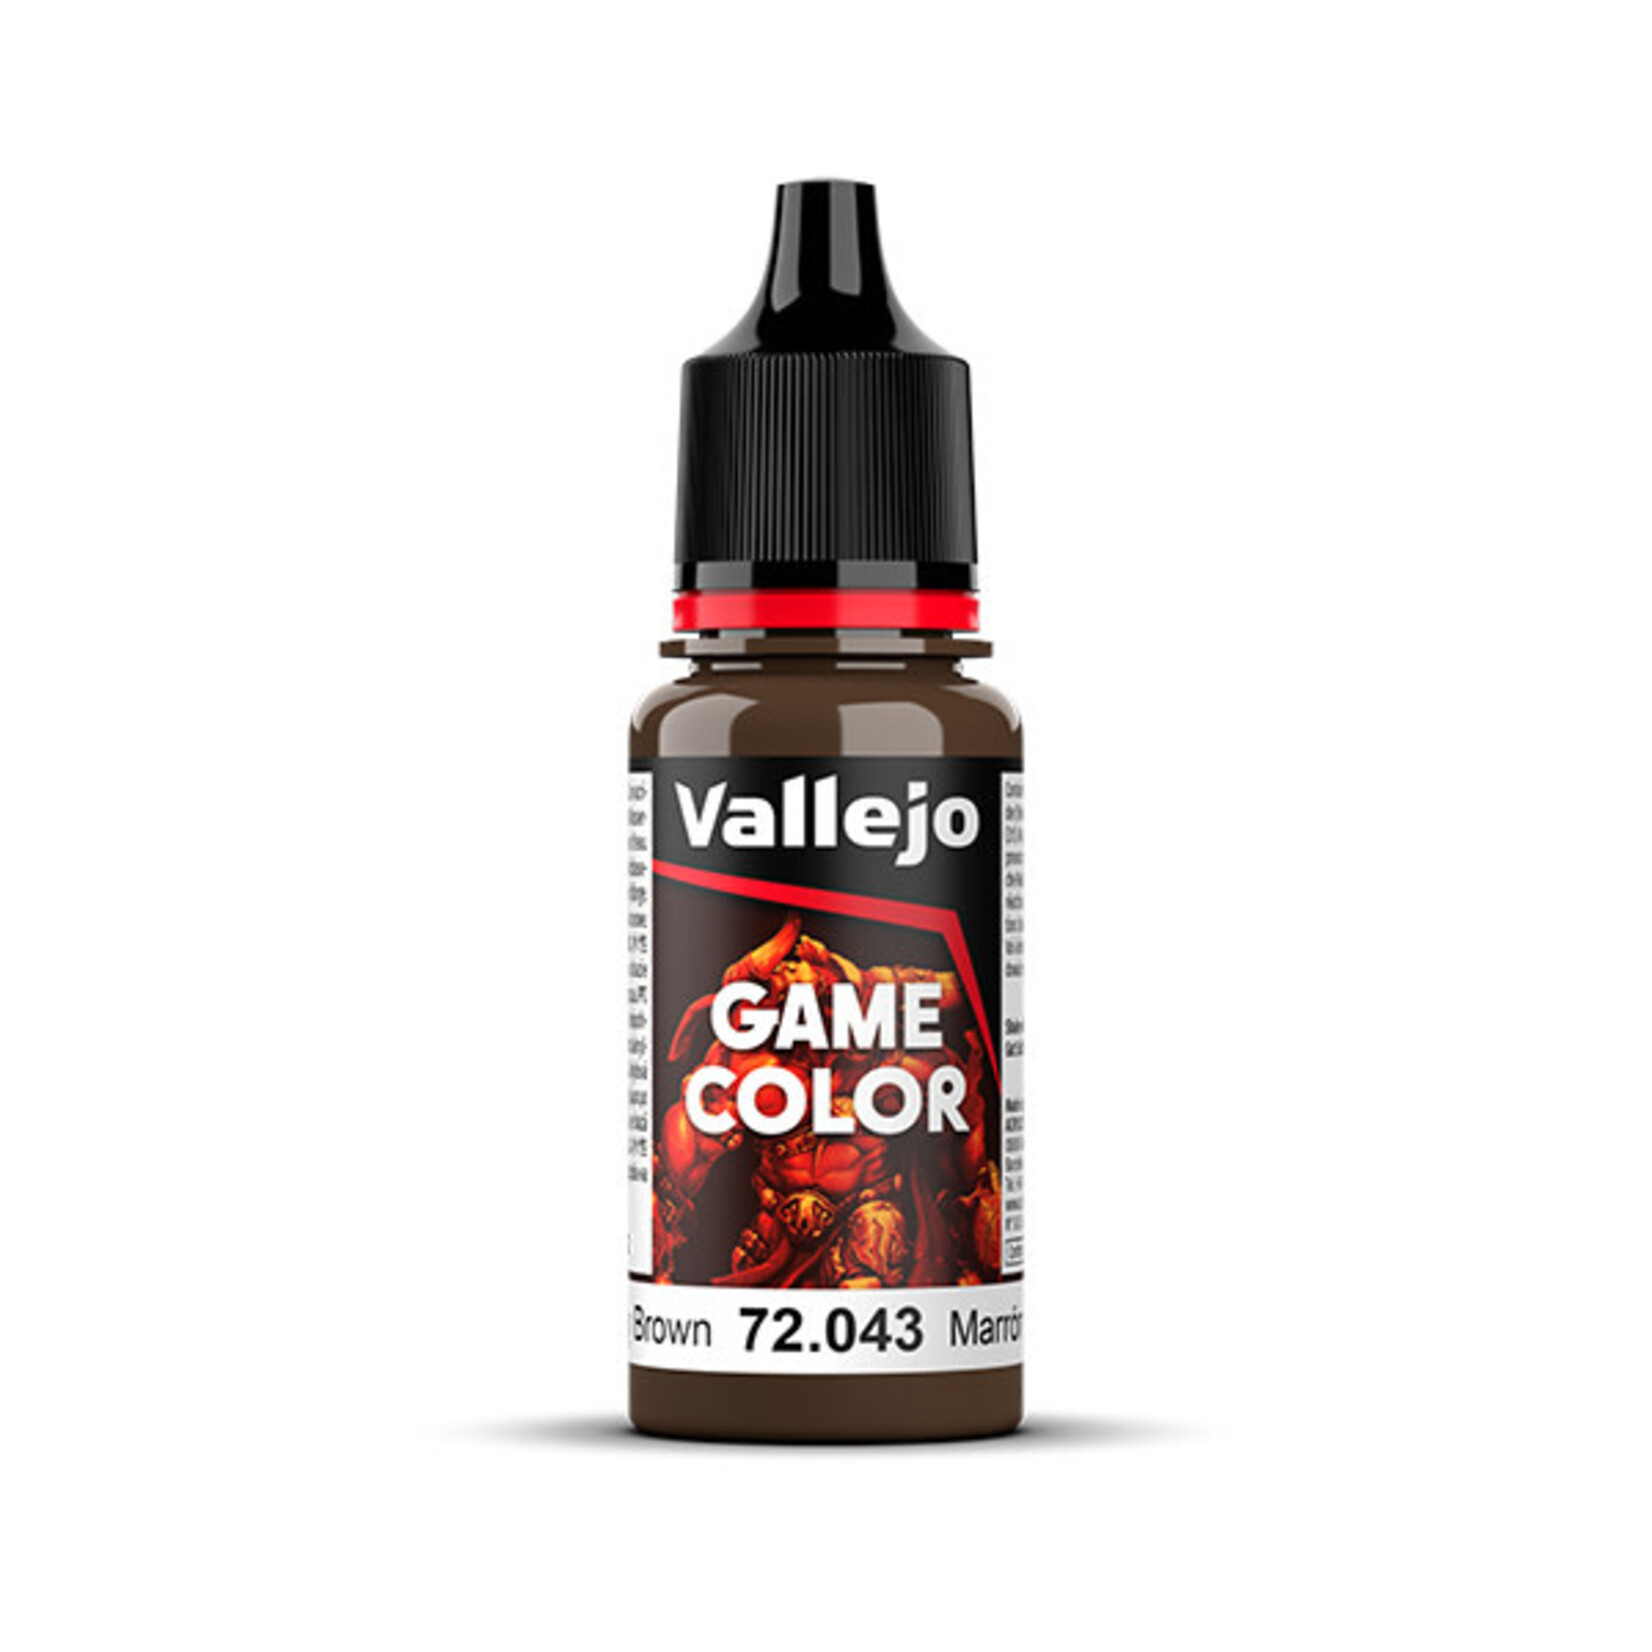 Vallejo Game Color Beasty Brown